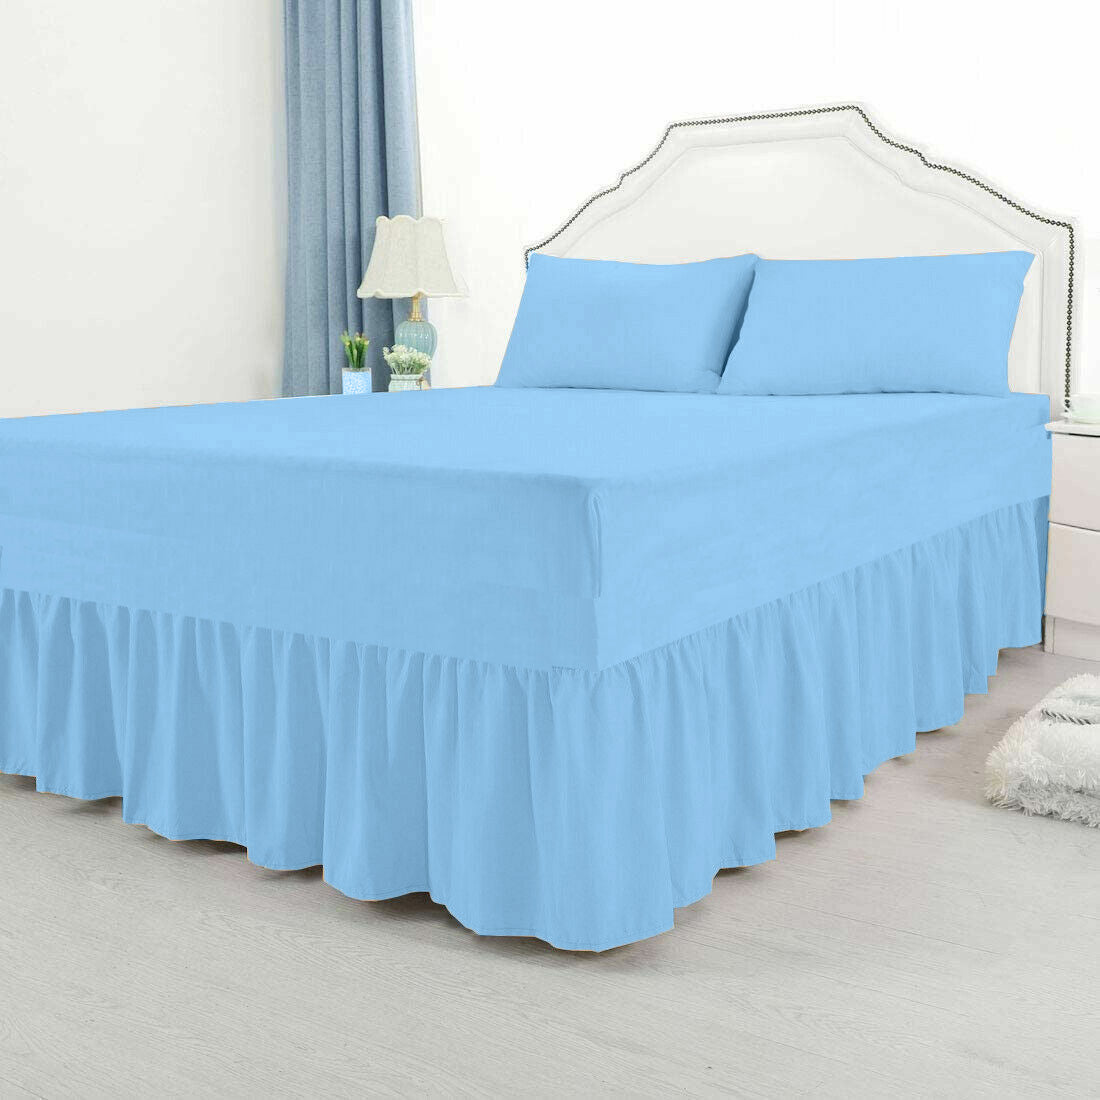 Special Sizes Extra Deep Fire Retardant Fitted Valance Sheet Bunk & 4 Foot Bed Size frill 6" to 18" Polycotton Bed Sheets ⭐⭐⭐⭐⭐